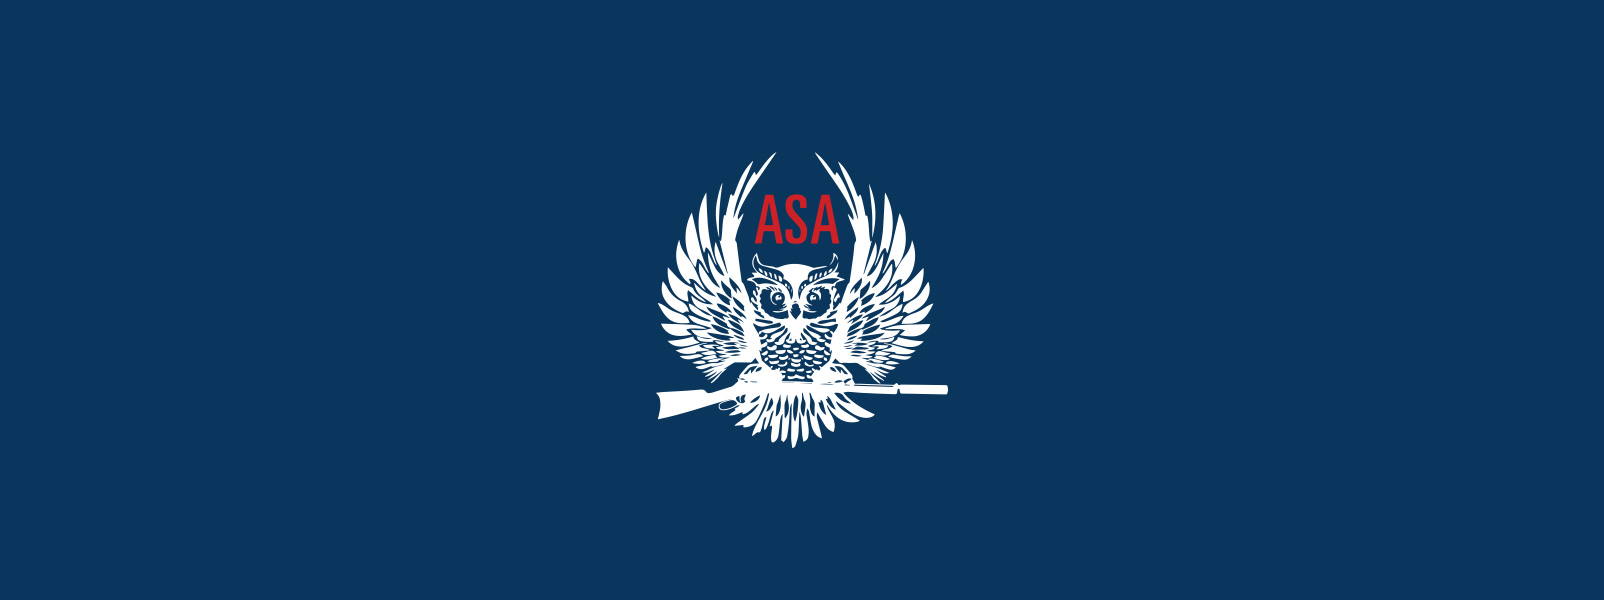 Read more about the article REGISTRATION OPENS FOR 2019 ASA INDUSTRY FORUM